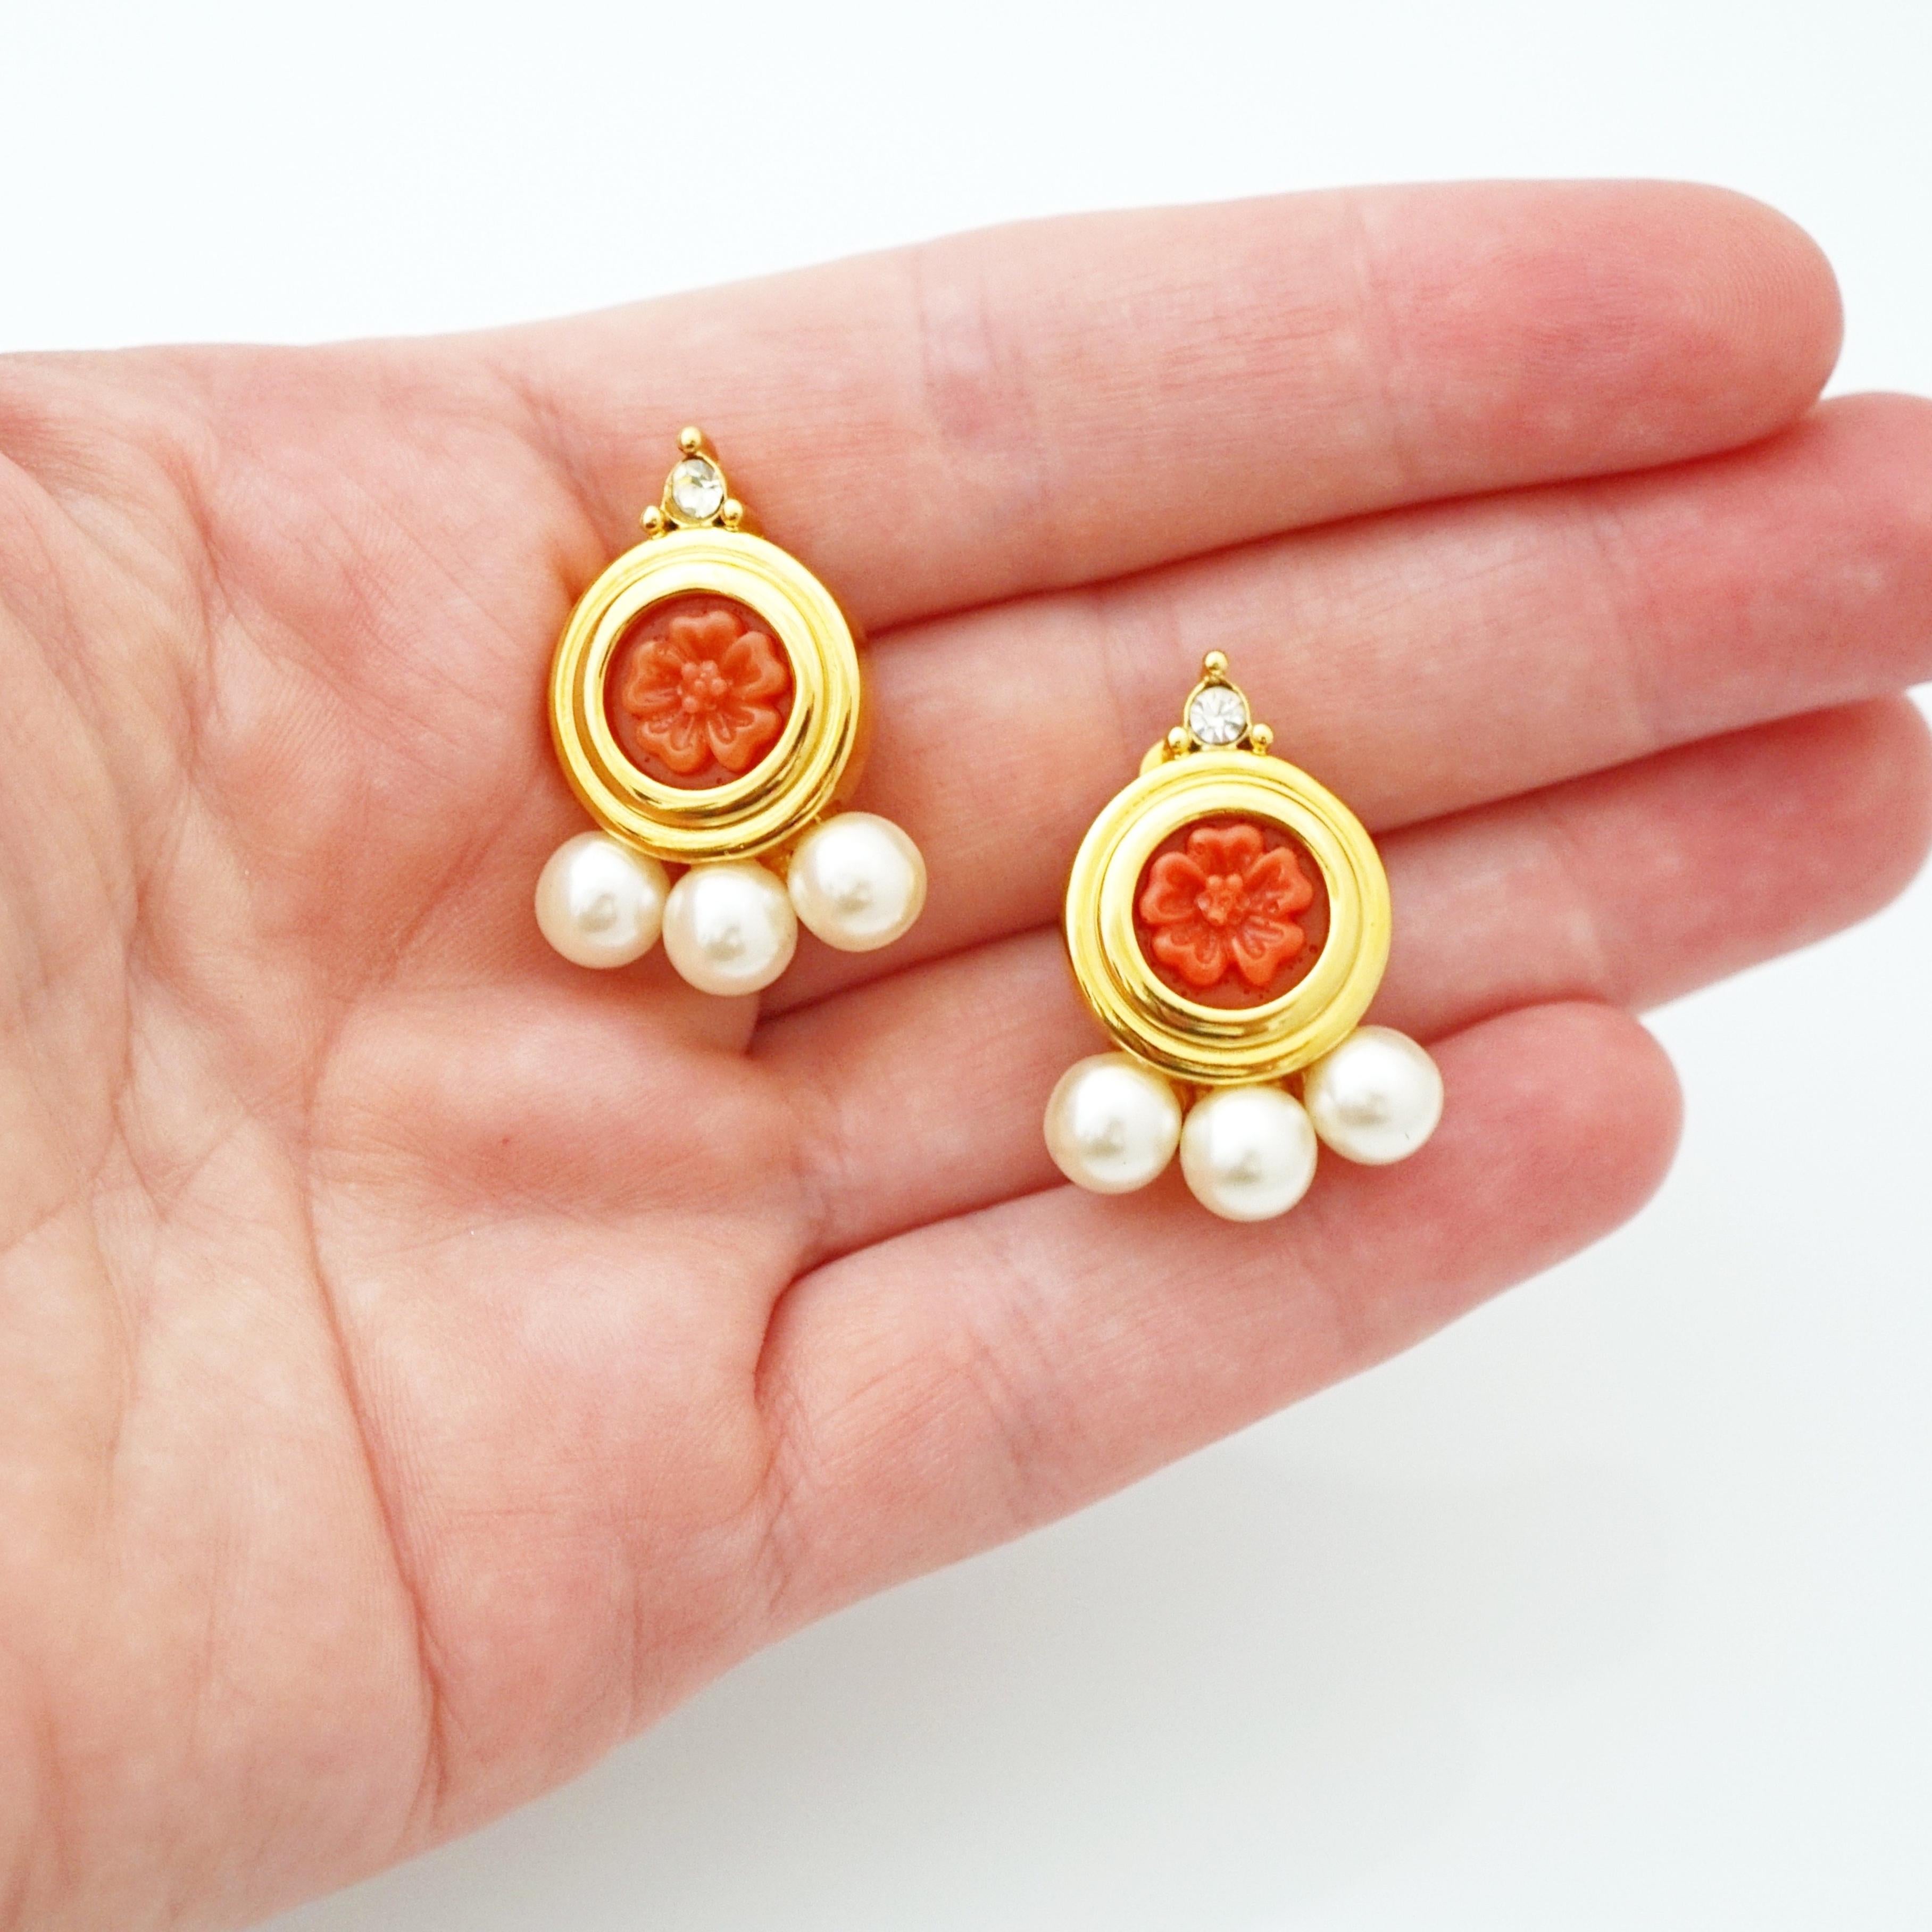 Women's Carved Faux Coral Earrings With Pearl Details By Joan Rivers, 1990s